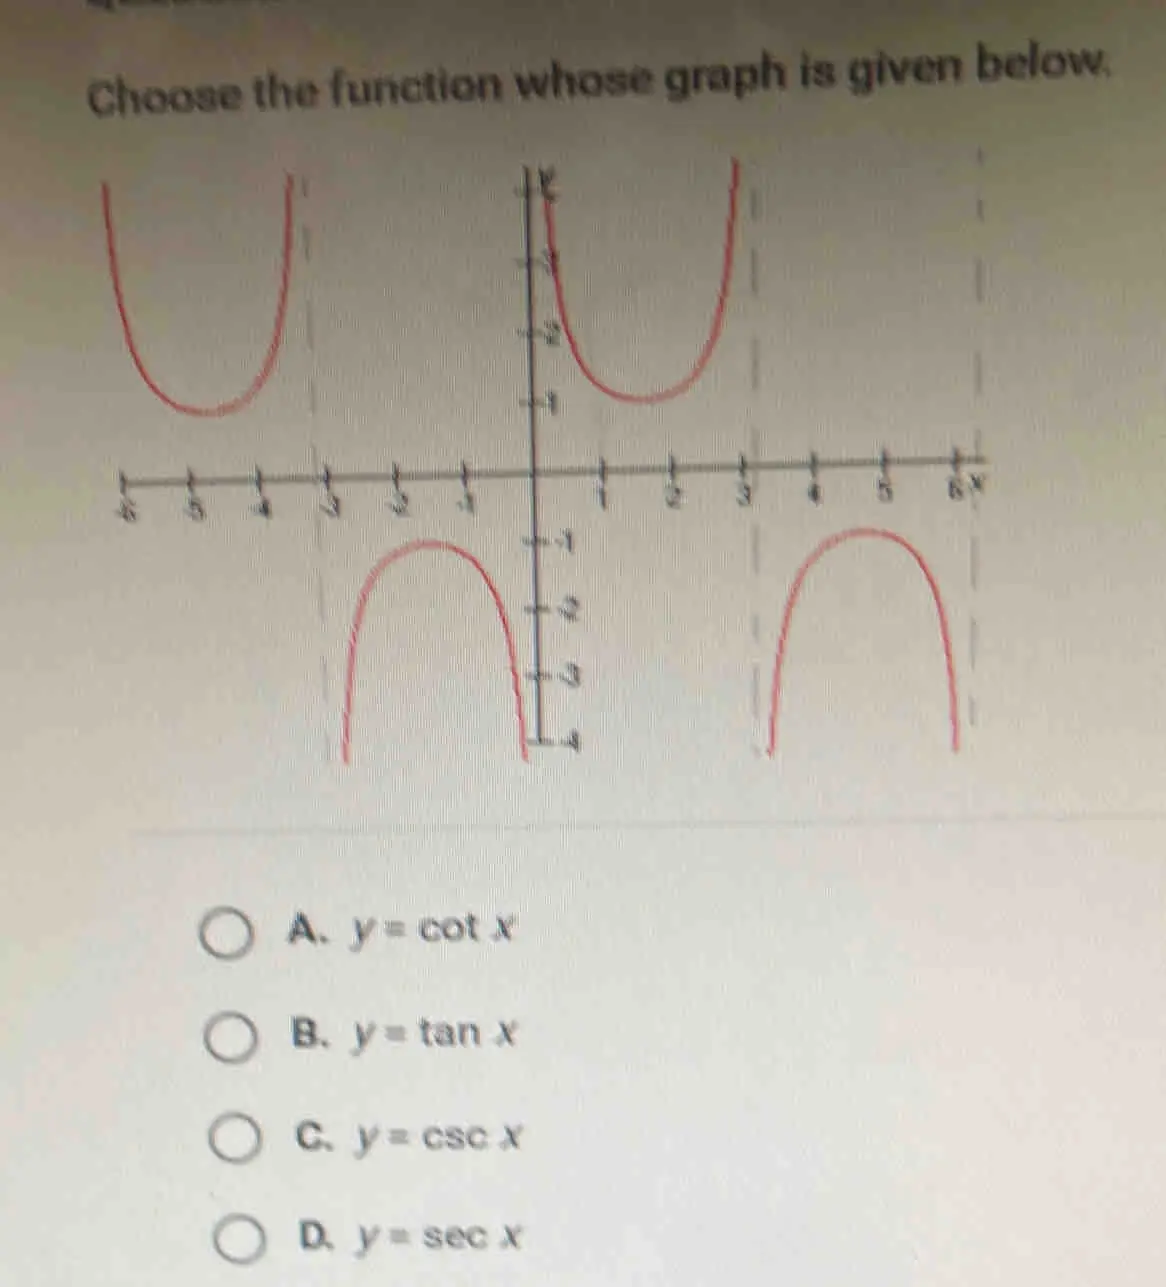 Choose the function whose graph is given below. A. y=cot x B. y=tan x C. y=csc x D. y=sec x